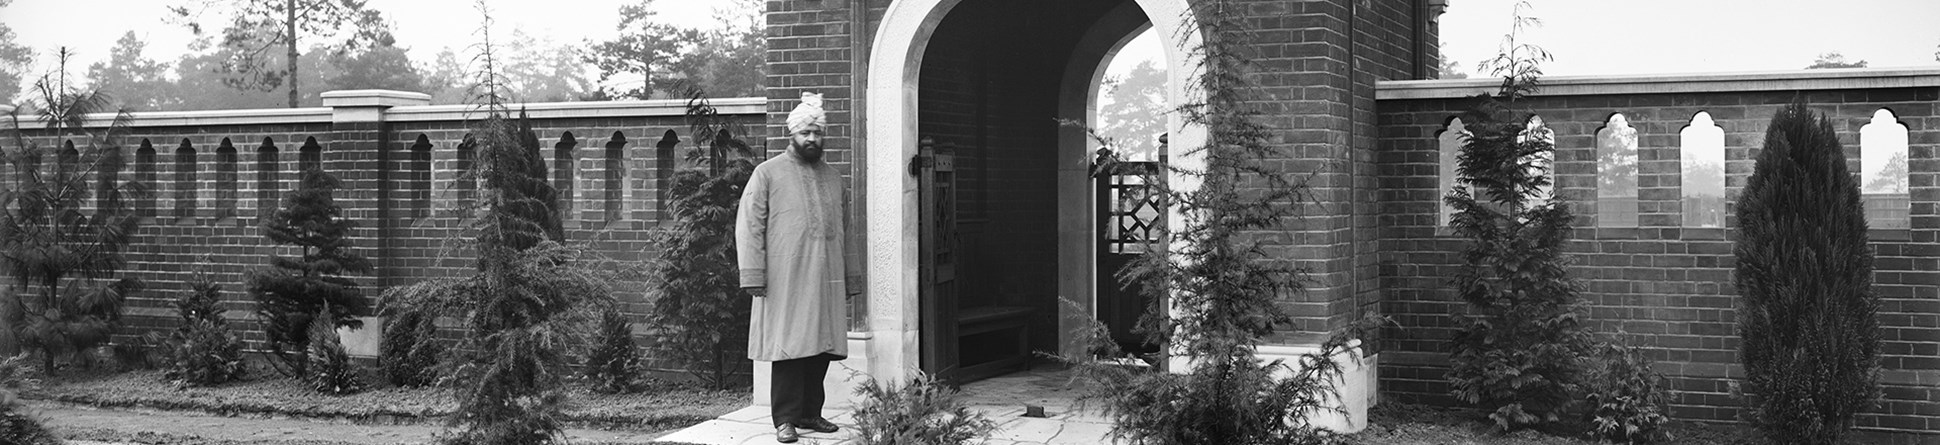 A man wearing a turban stands in front of the Indian inspired gateway of the Muslim Burial Ground, Horsell Common, Surrey. A wall pierced with Indian style tracery surrounds the cemetery.